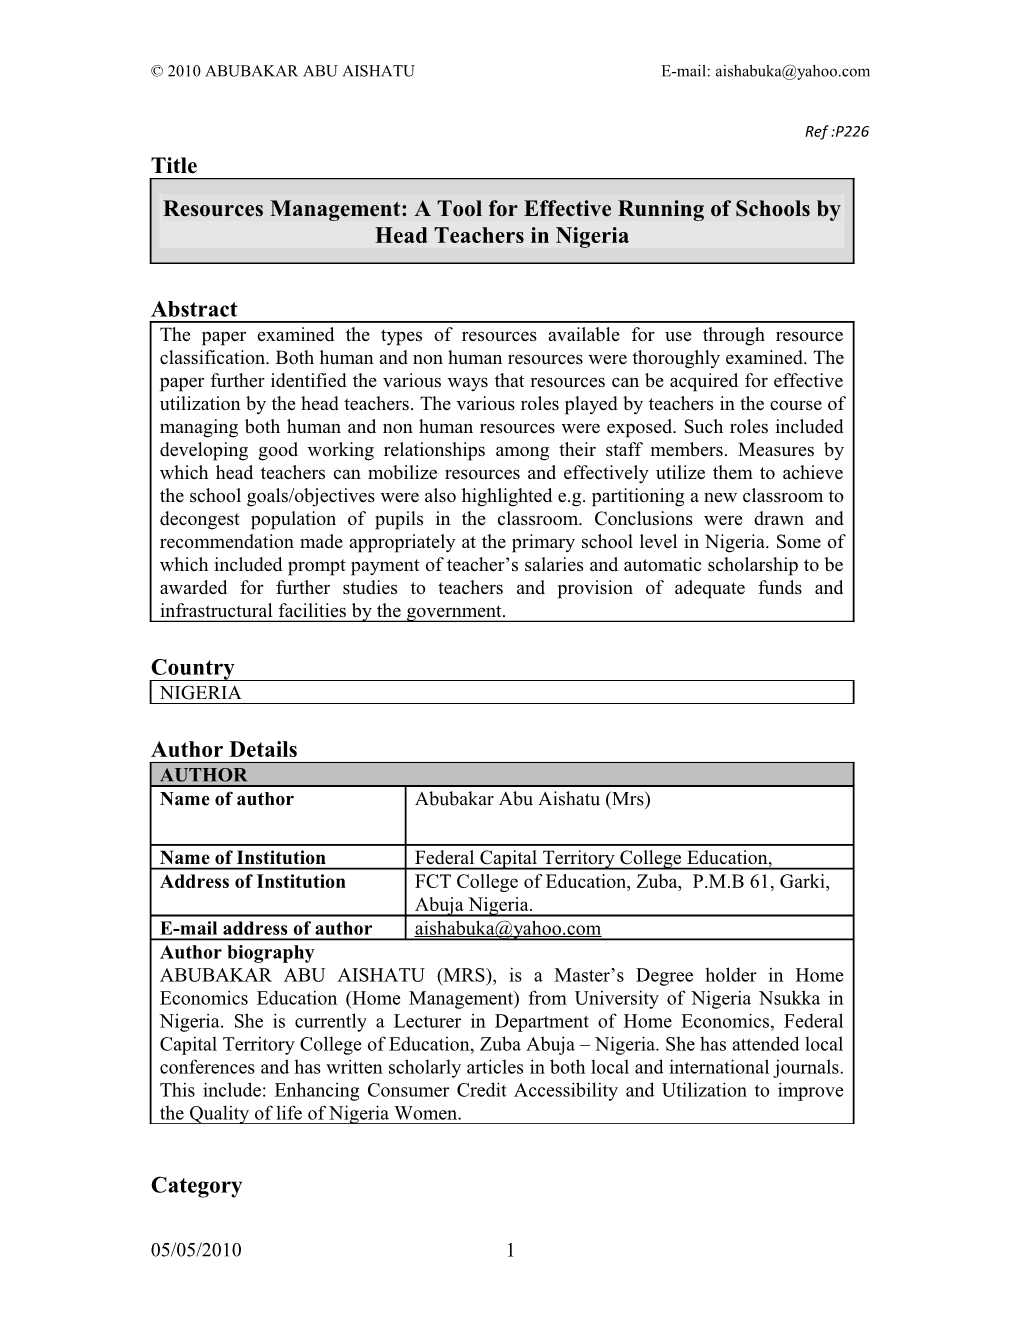 Resources Management: a Tool for Effective Running of Schools by Head Teacher in Federal